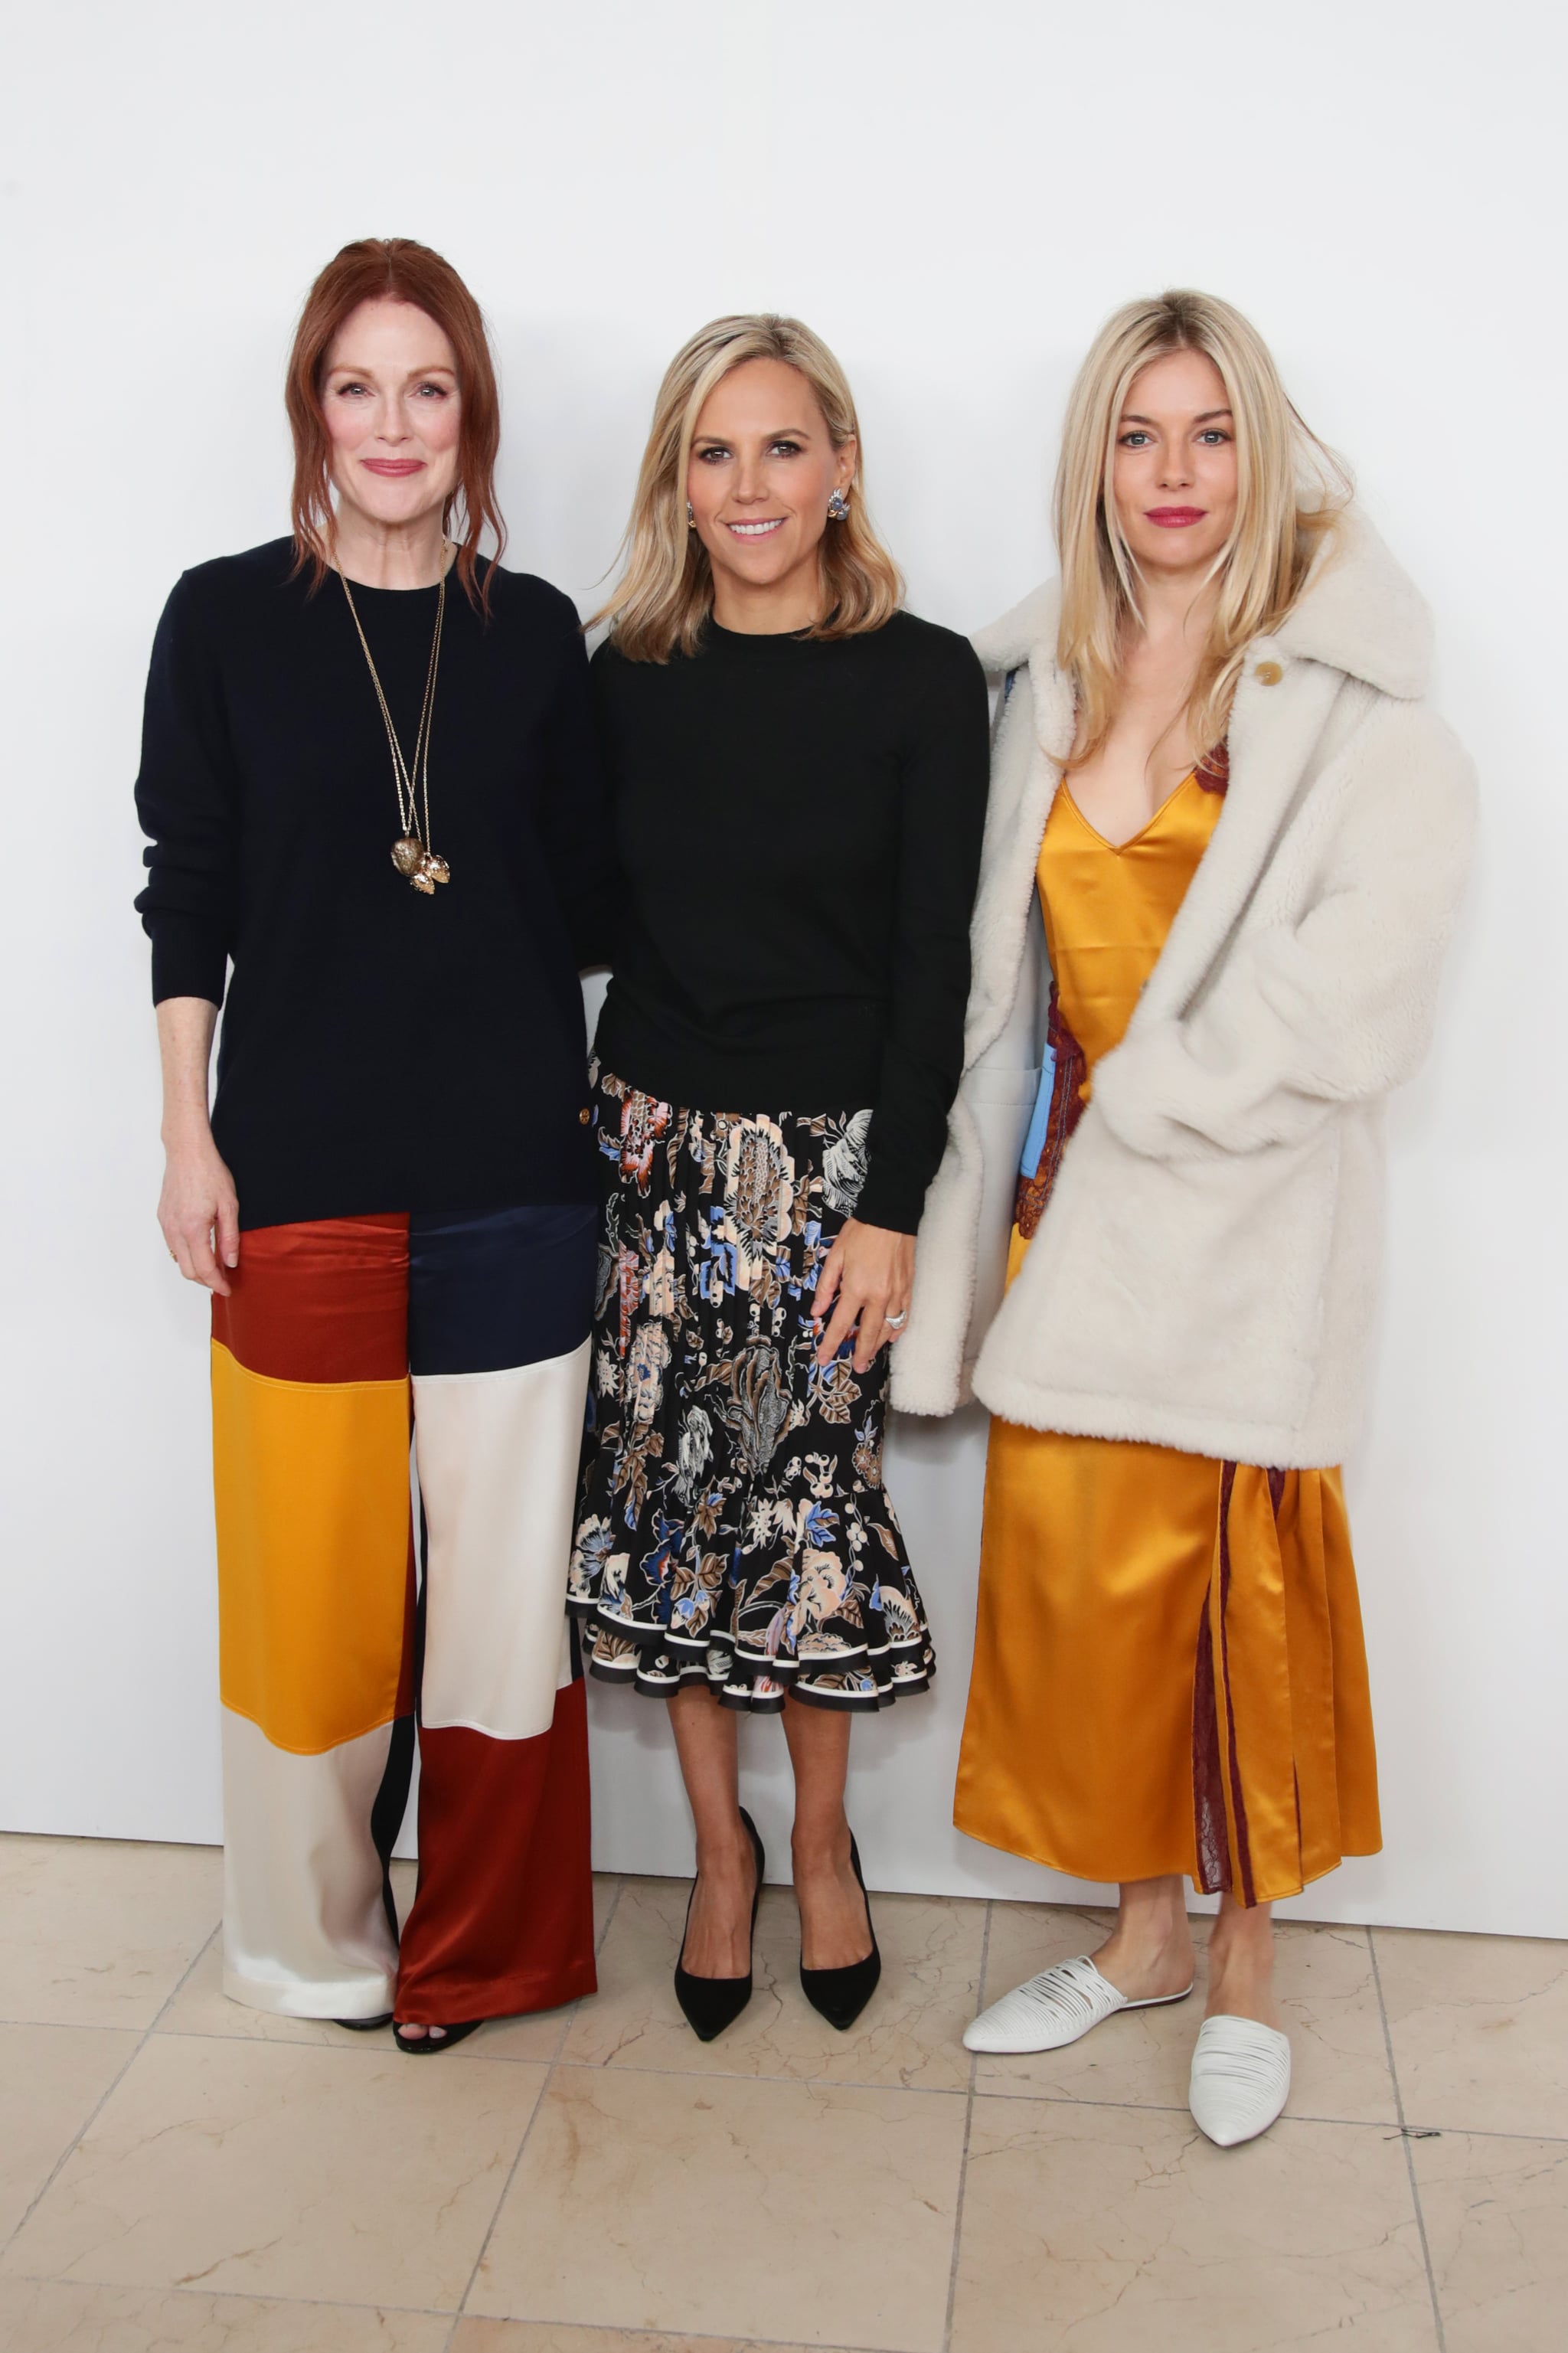 Tory Burch's Embrace Ambition Summit Was Full of Young Activists